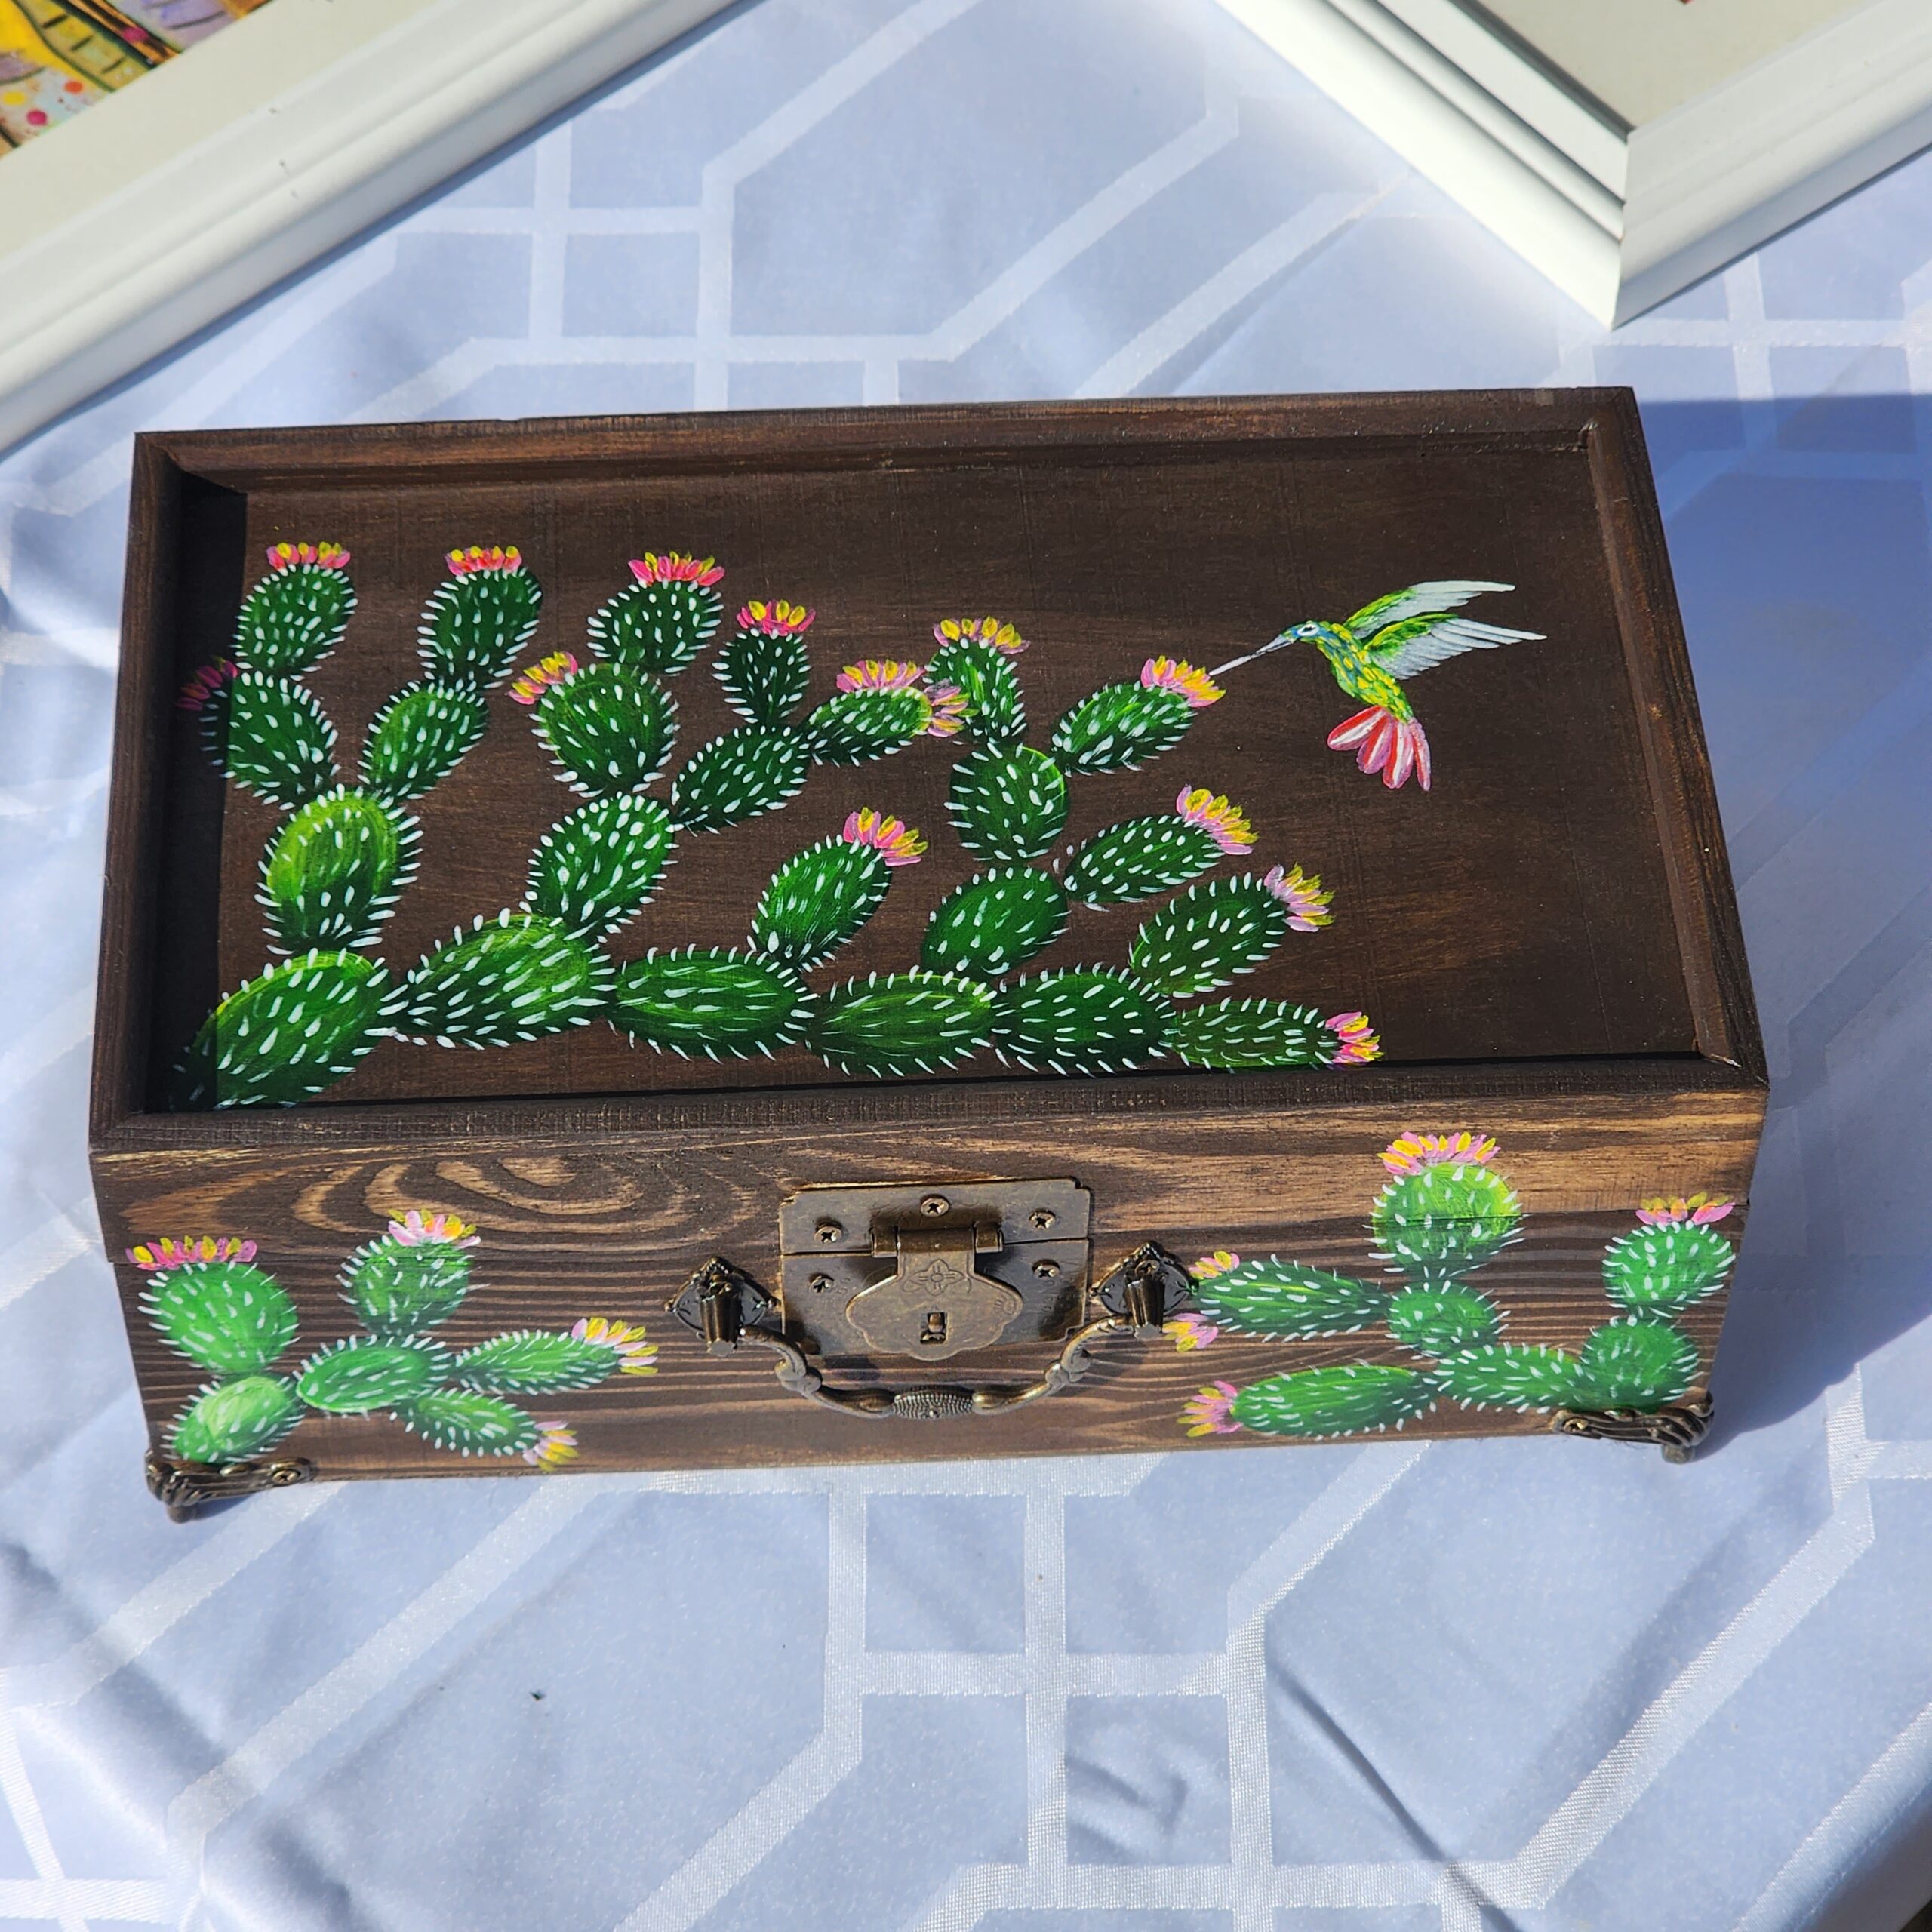 Beautiful handpainted wooden trinket box with a mirror and metal feet. This cute cacti and hummingbird trinket box is an ideal gift for a special loved one. You can store jewelry such as rings, necklaces, bracelets, or anything you would like to keep in a particular place, especially in this elegant and artistic trinket box.